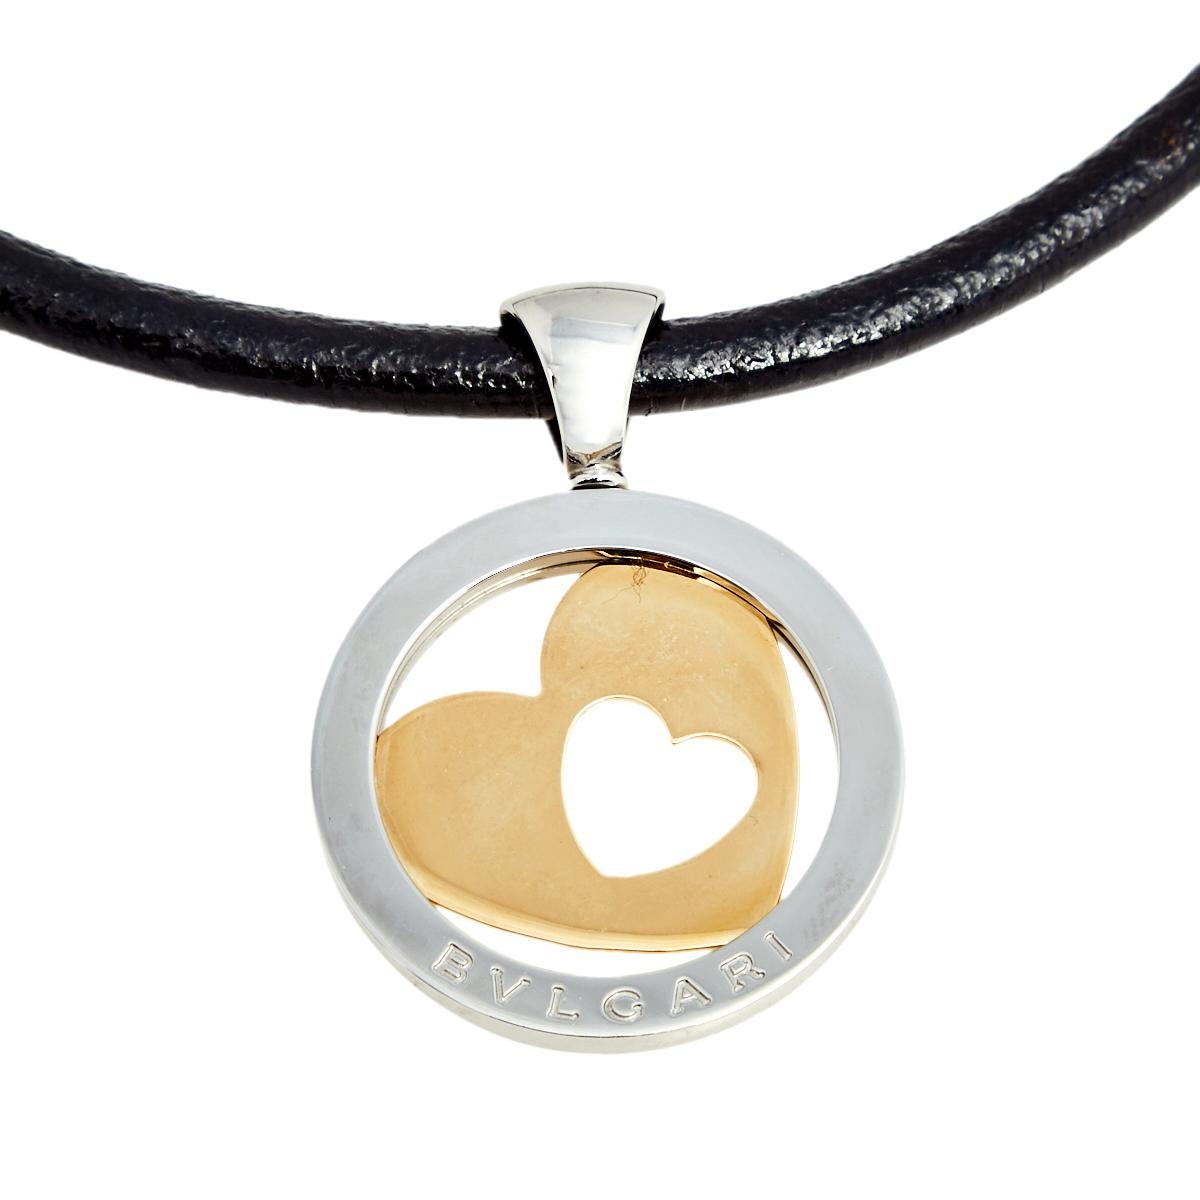 Bvlgari's necklace is effortless, bold, and stylish. It features a strand of leather cord secured with a lobster clasp closure and elevated with a cutesy rounded stainless steel pendant with a heart-shaped cut-out crafted in 18k gold at its center.